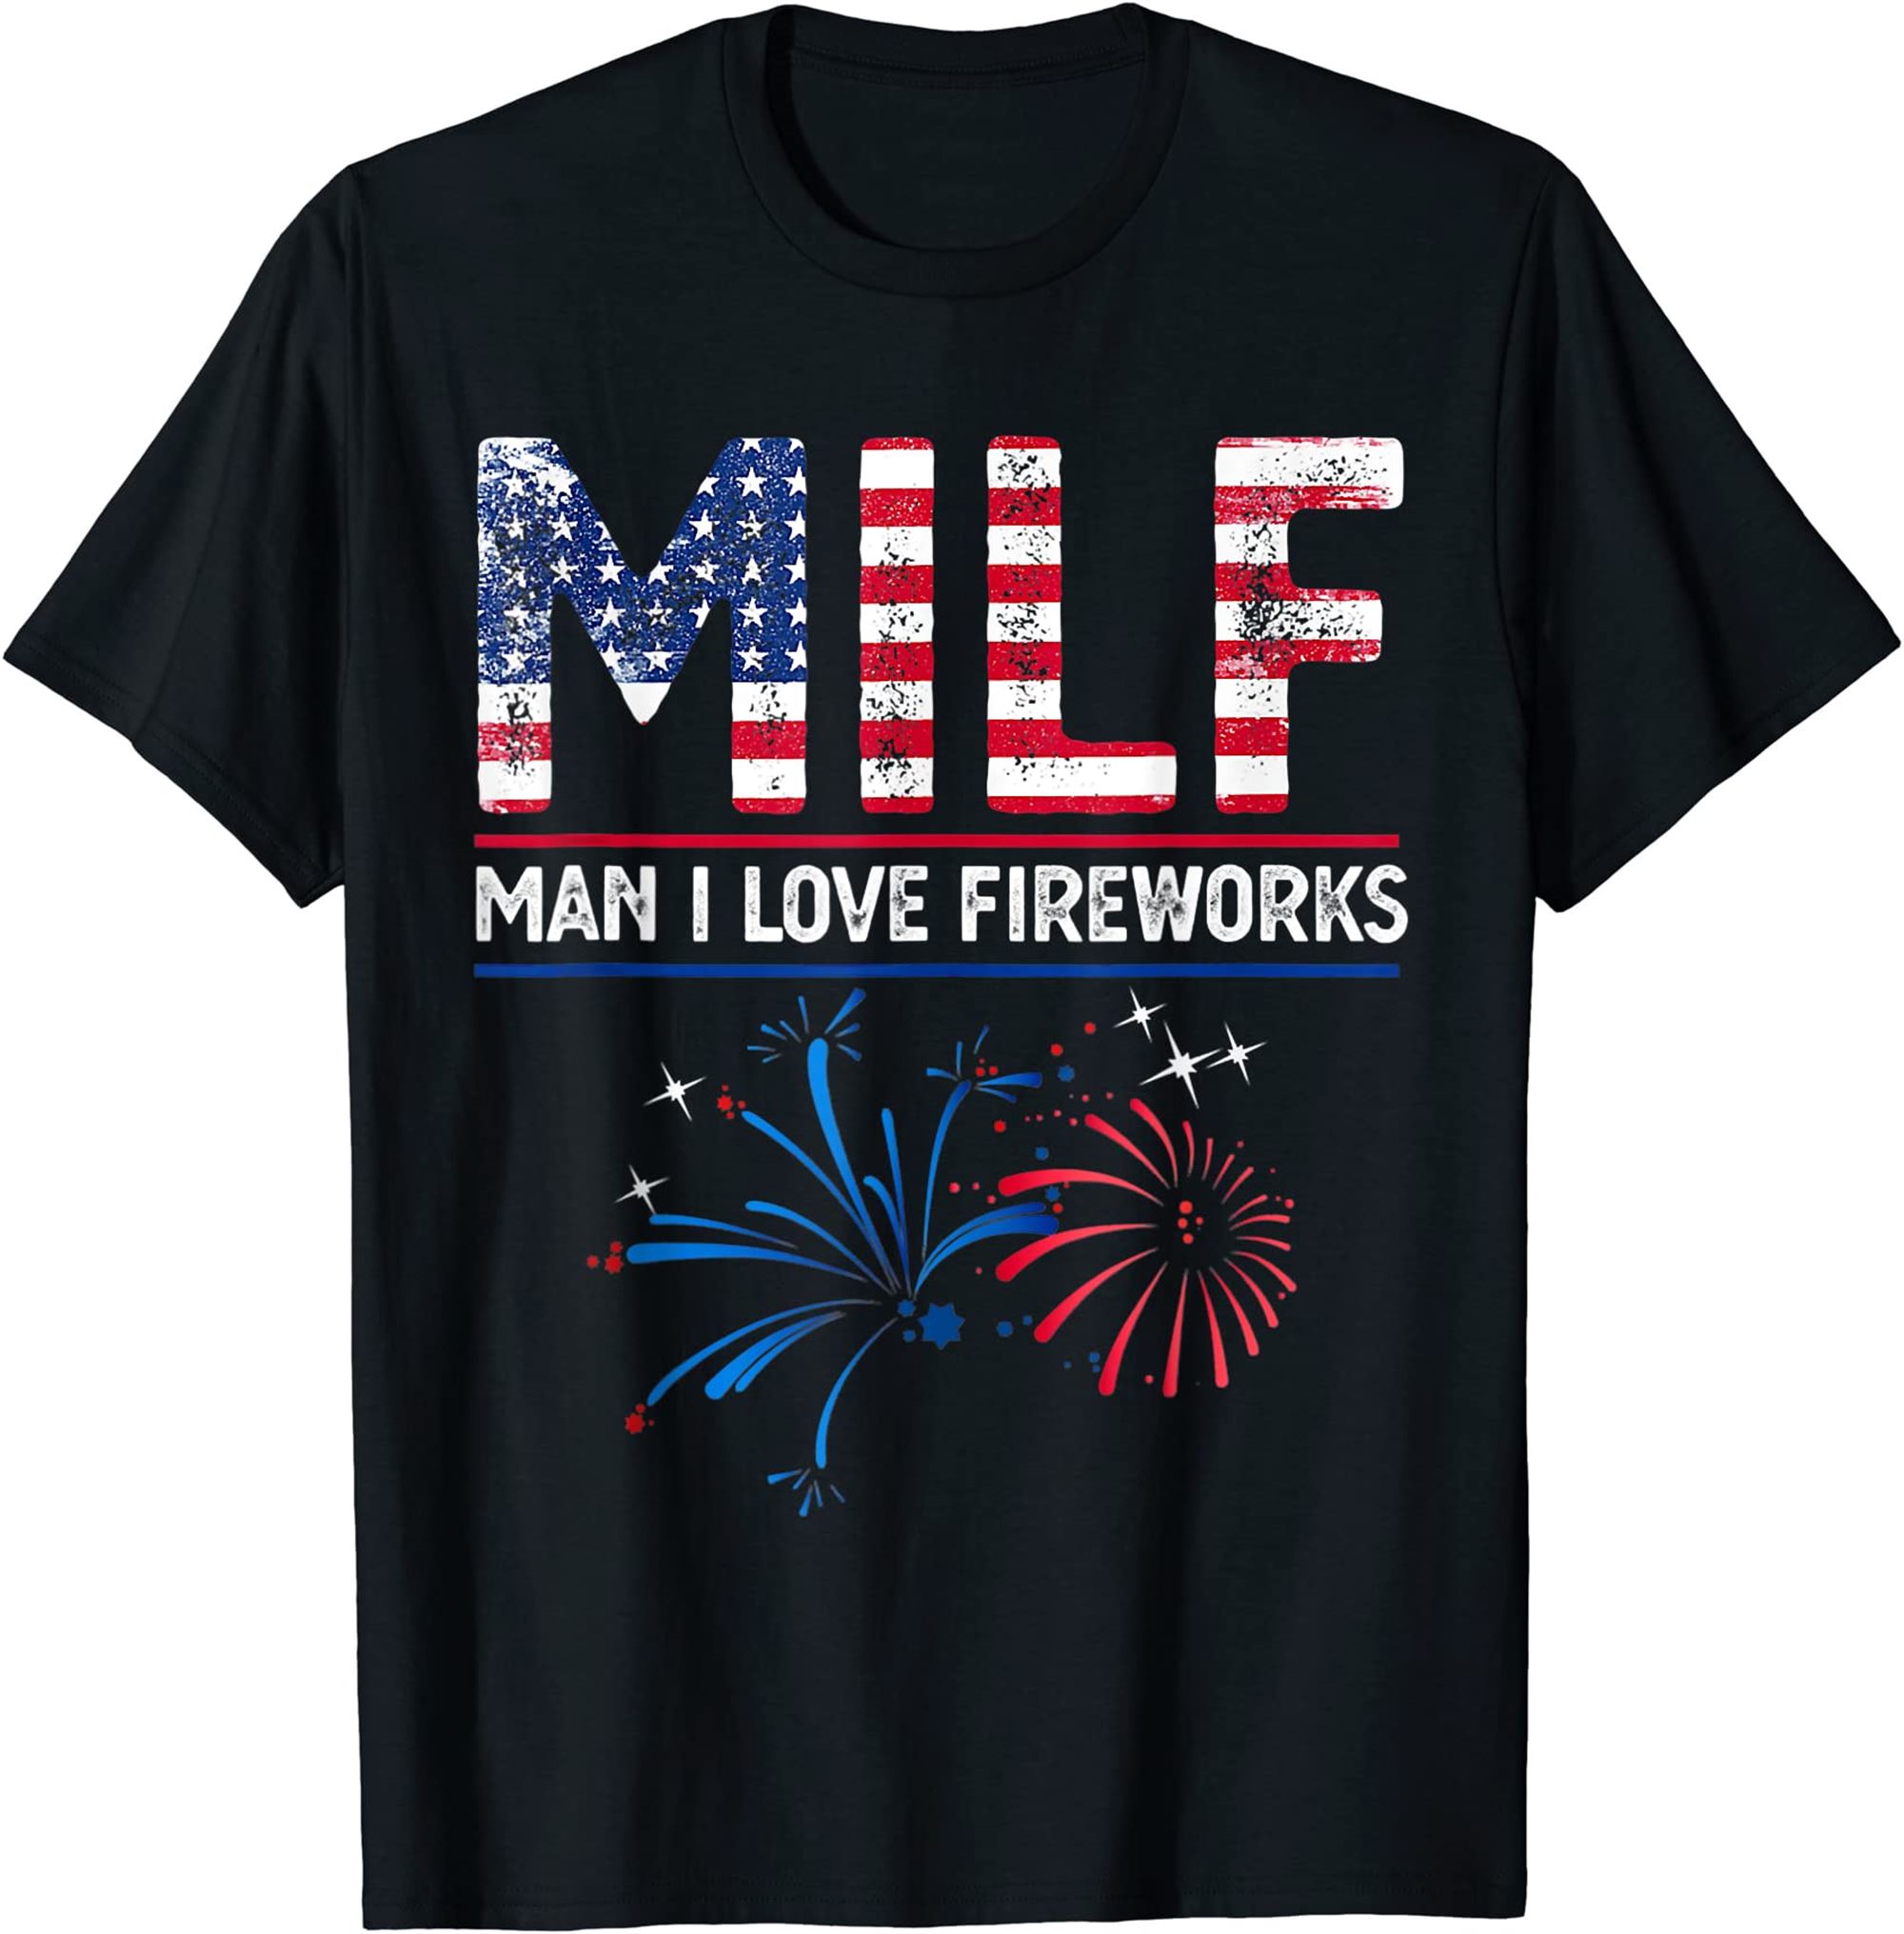 Milf Man I Love Fireworks Funny American Patriotic July 4th T-shirt Full Size Up To 5xl